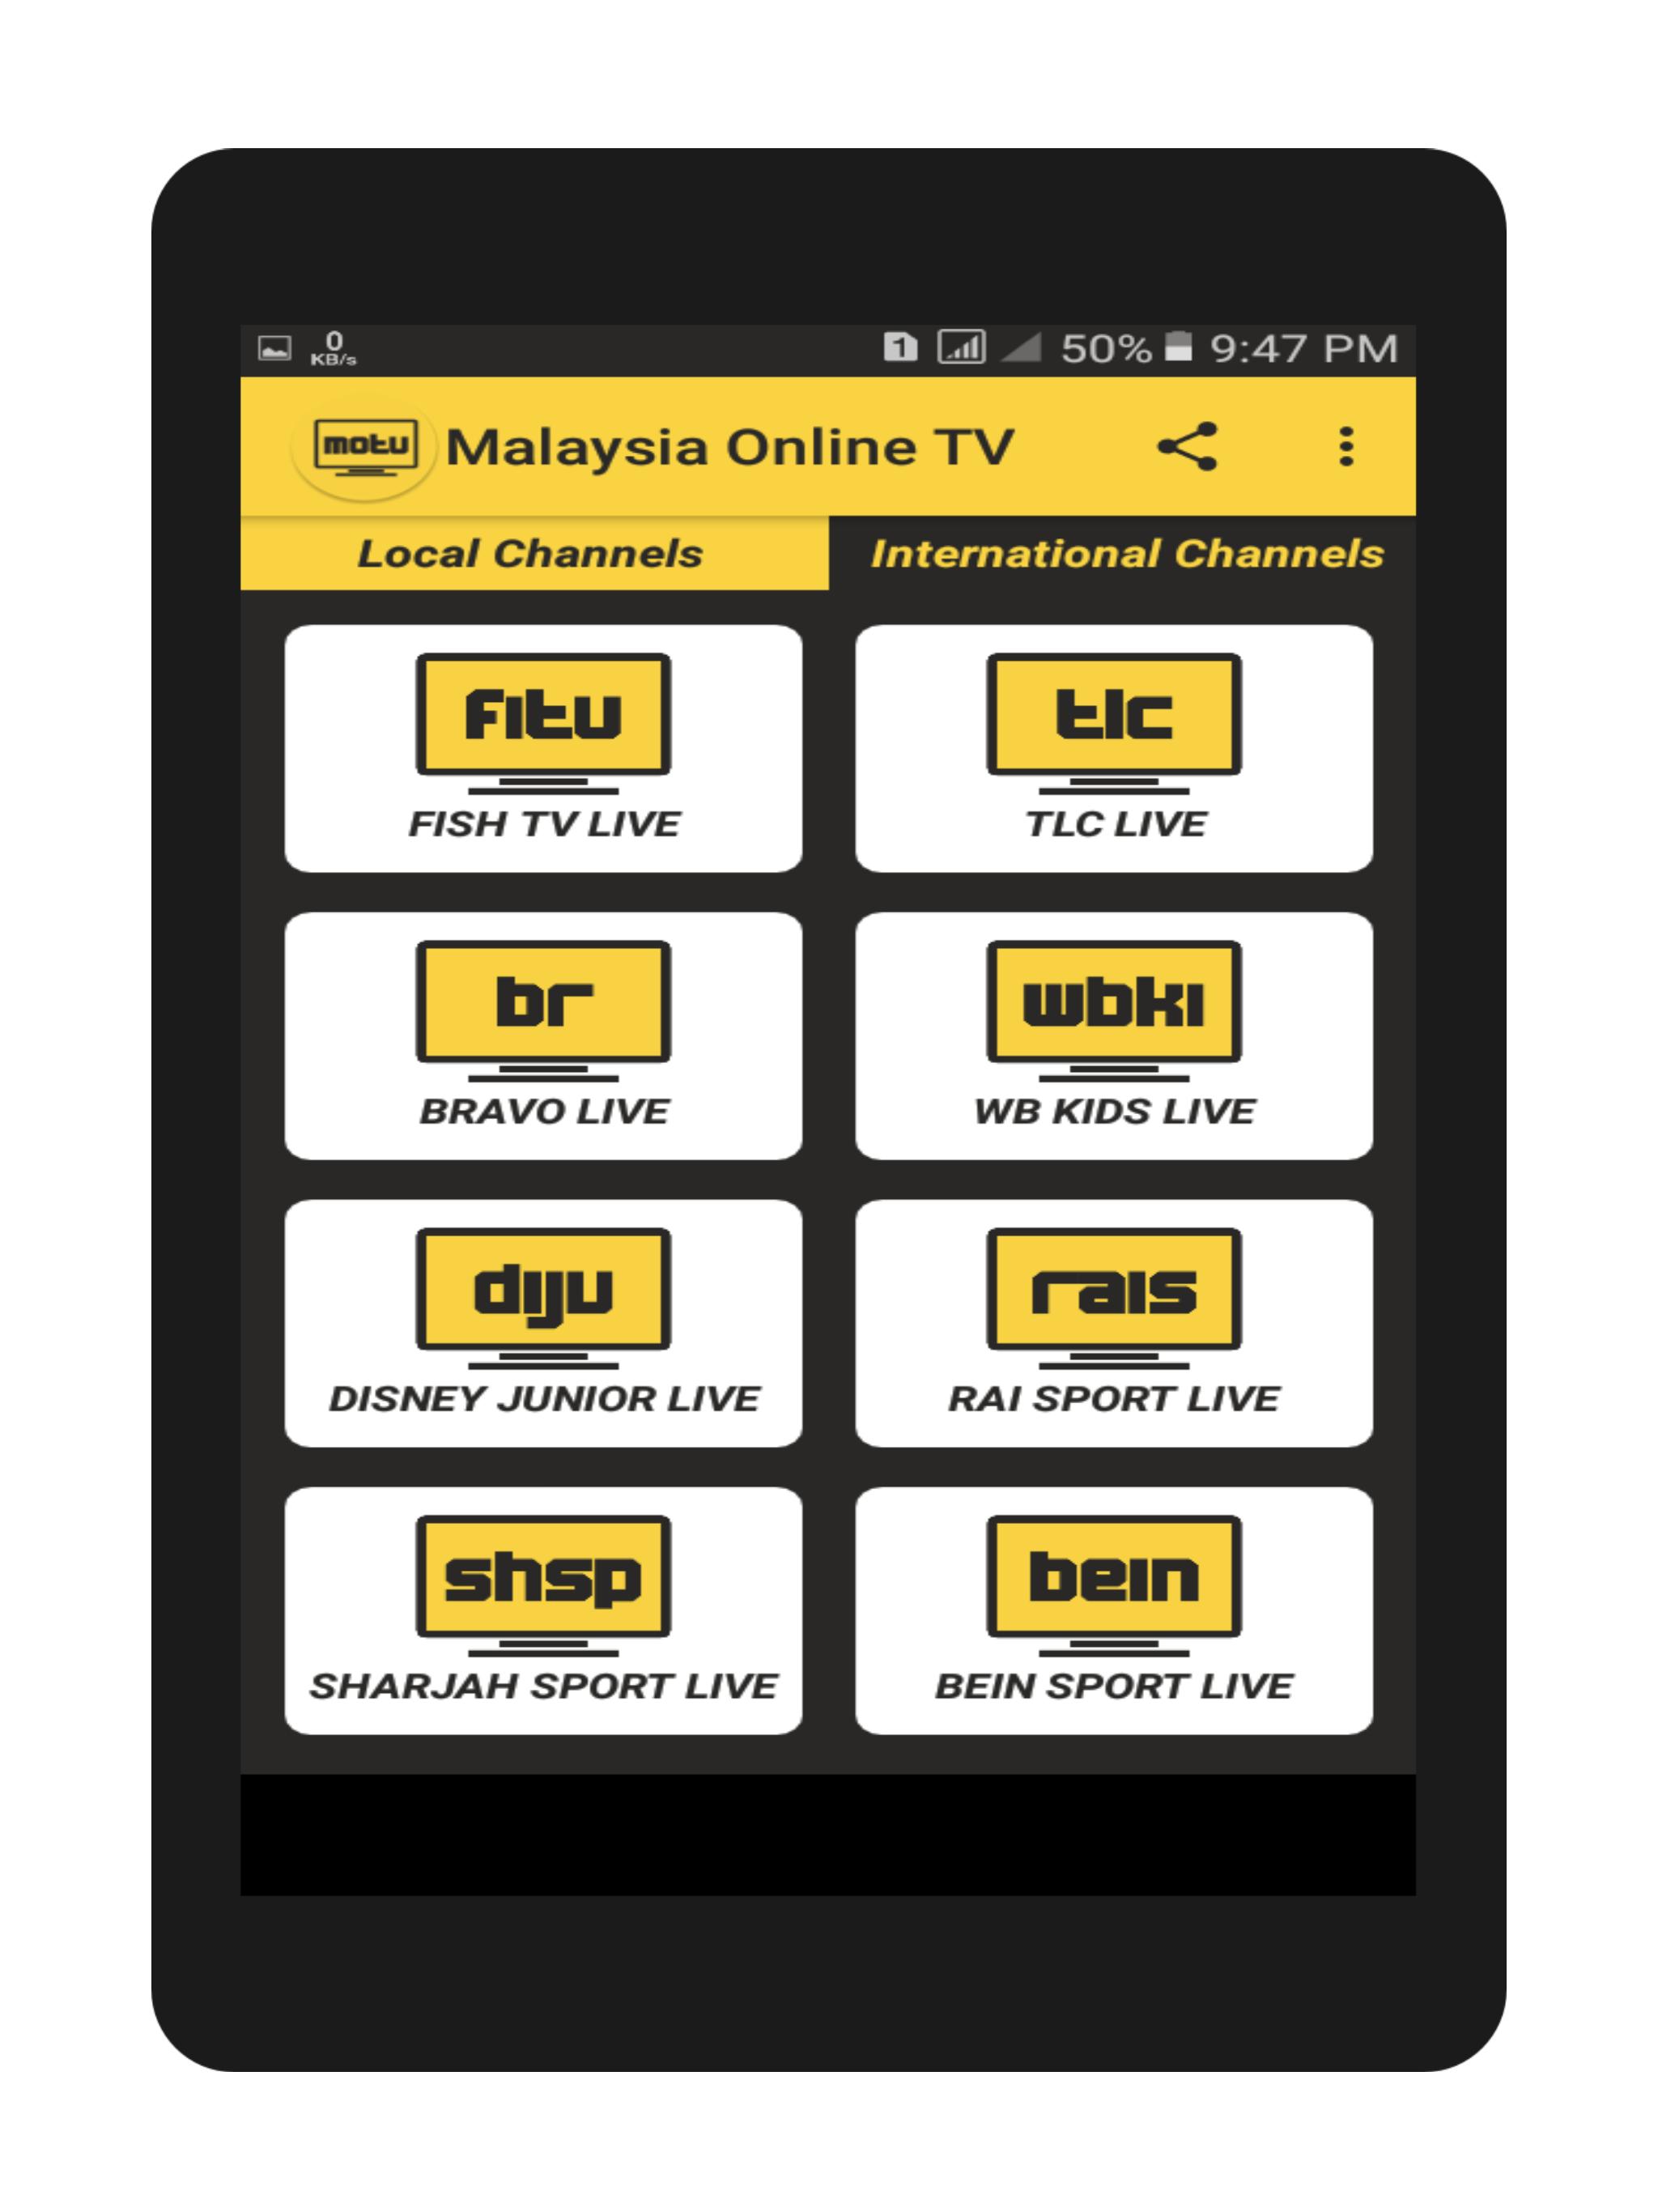 Motv Malaysia Online Tv For Android Apk Download